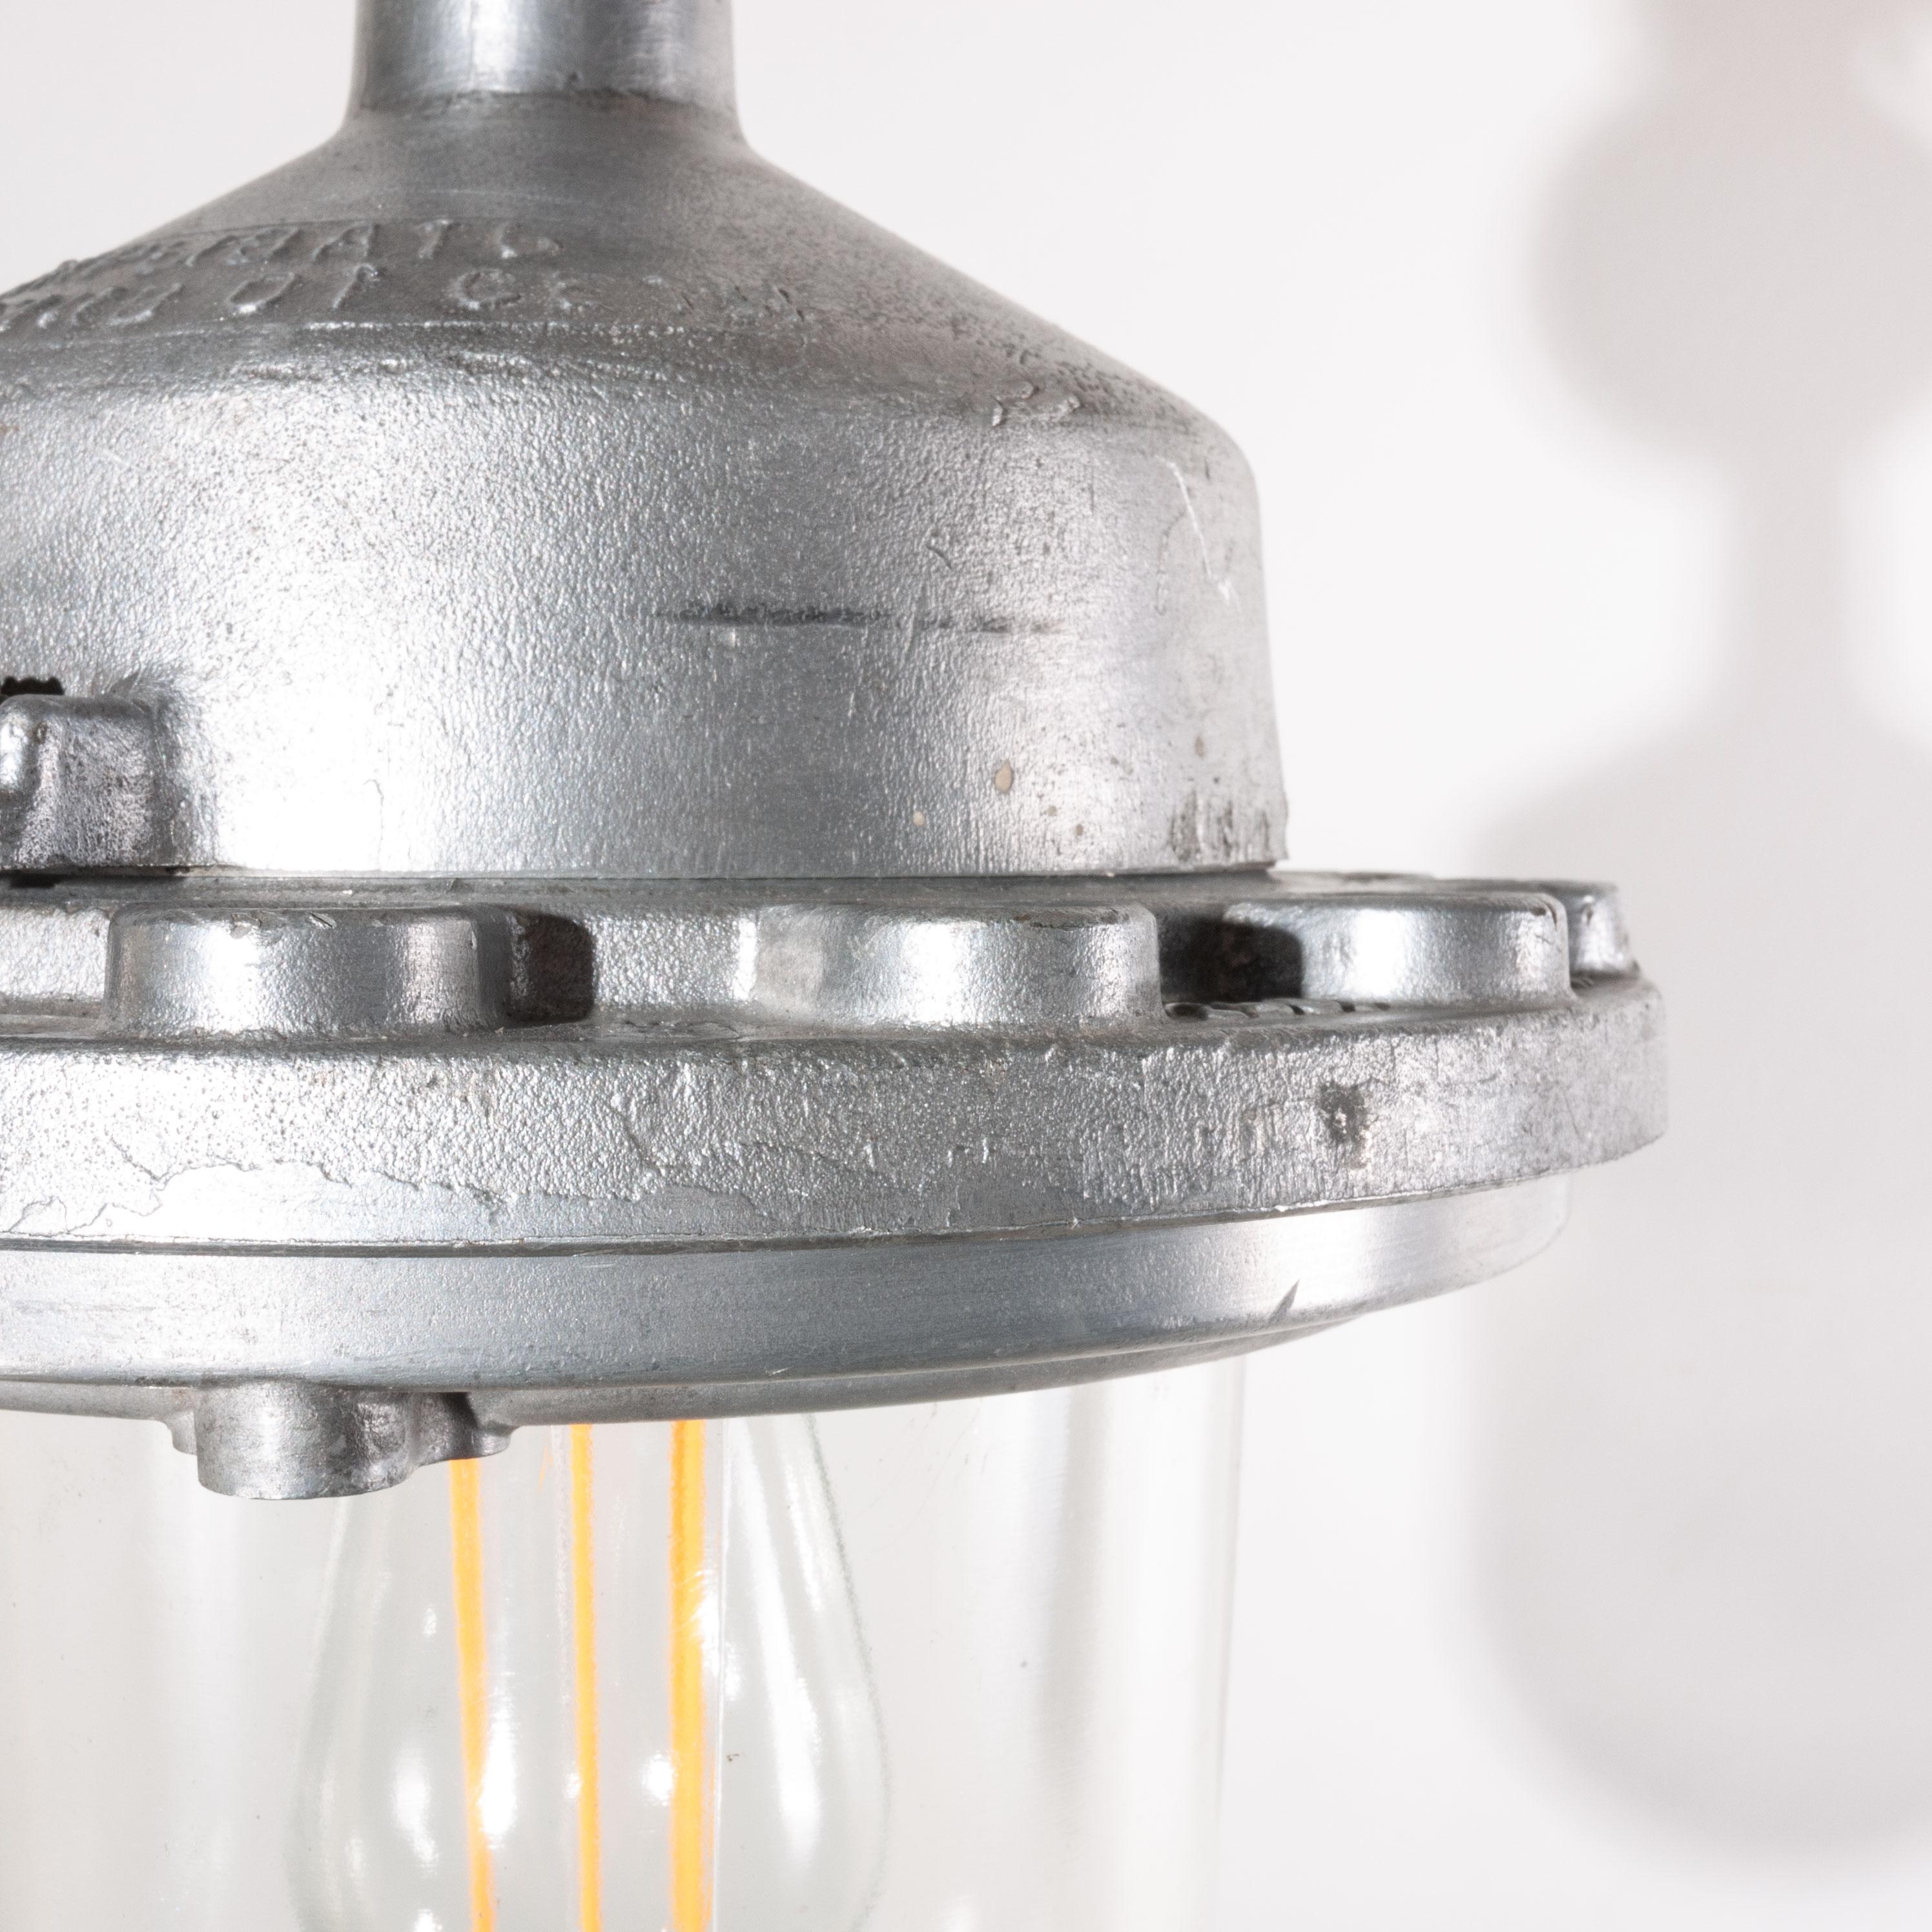 1960s industrial explosion proof ceiling pendant lamps/lights – With glass domes – Model 2
1960s vintage original industrial explosion proof ceiling pendant lamps/lights with glass domes. A hugely popular lamps we have a number of these stunning